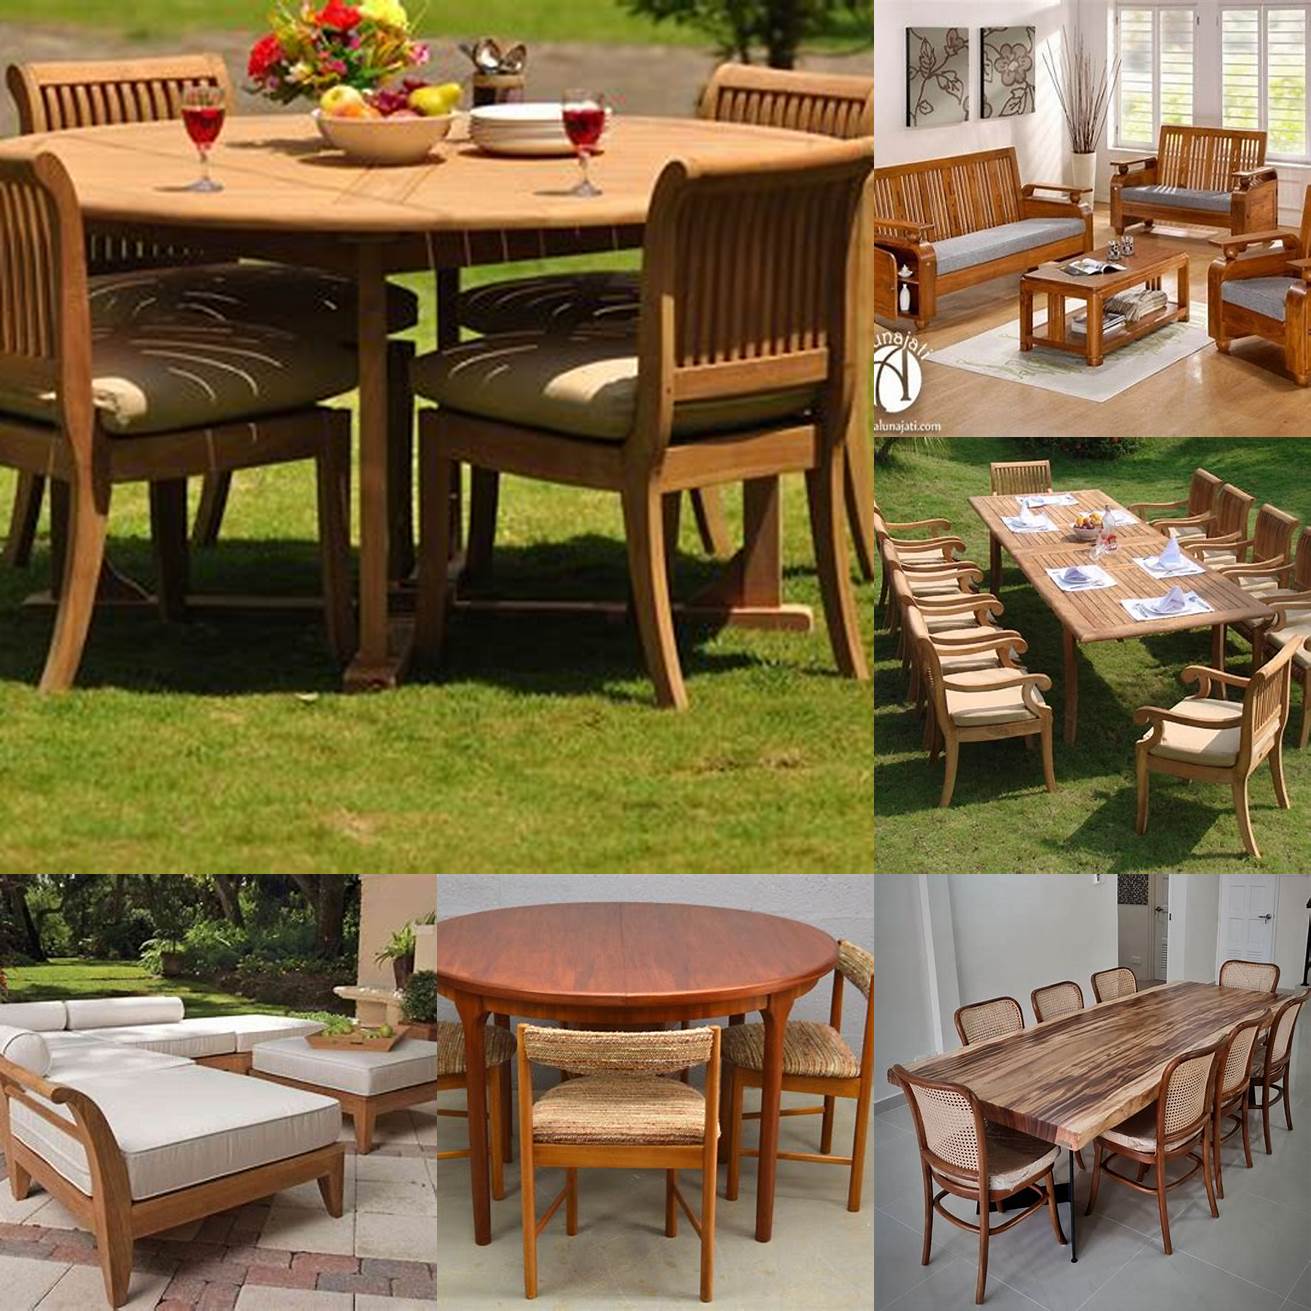 A Photo of Teak Furniture in Different Styles